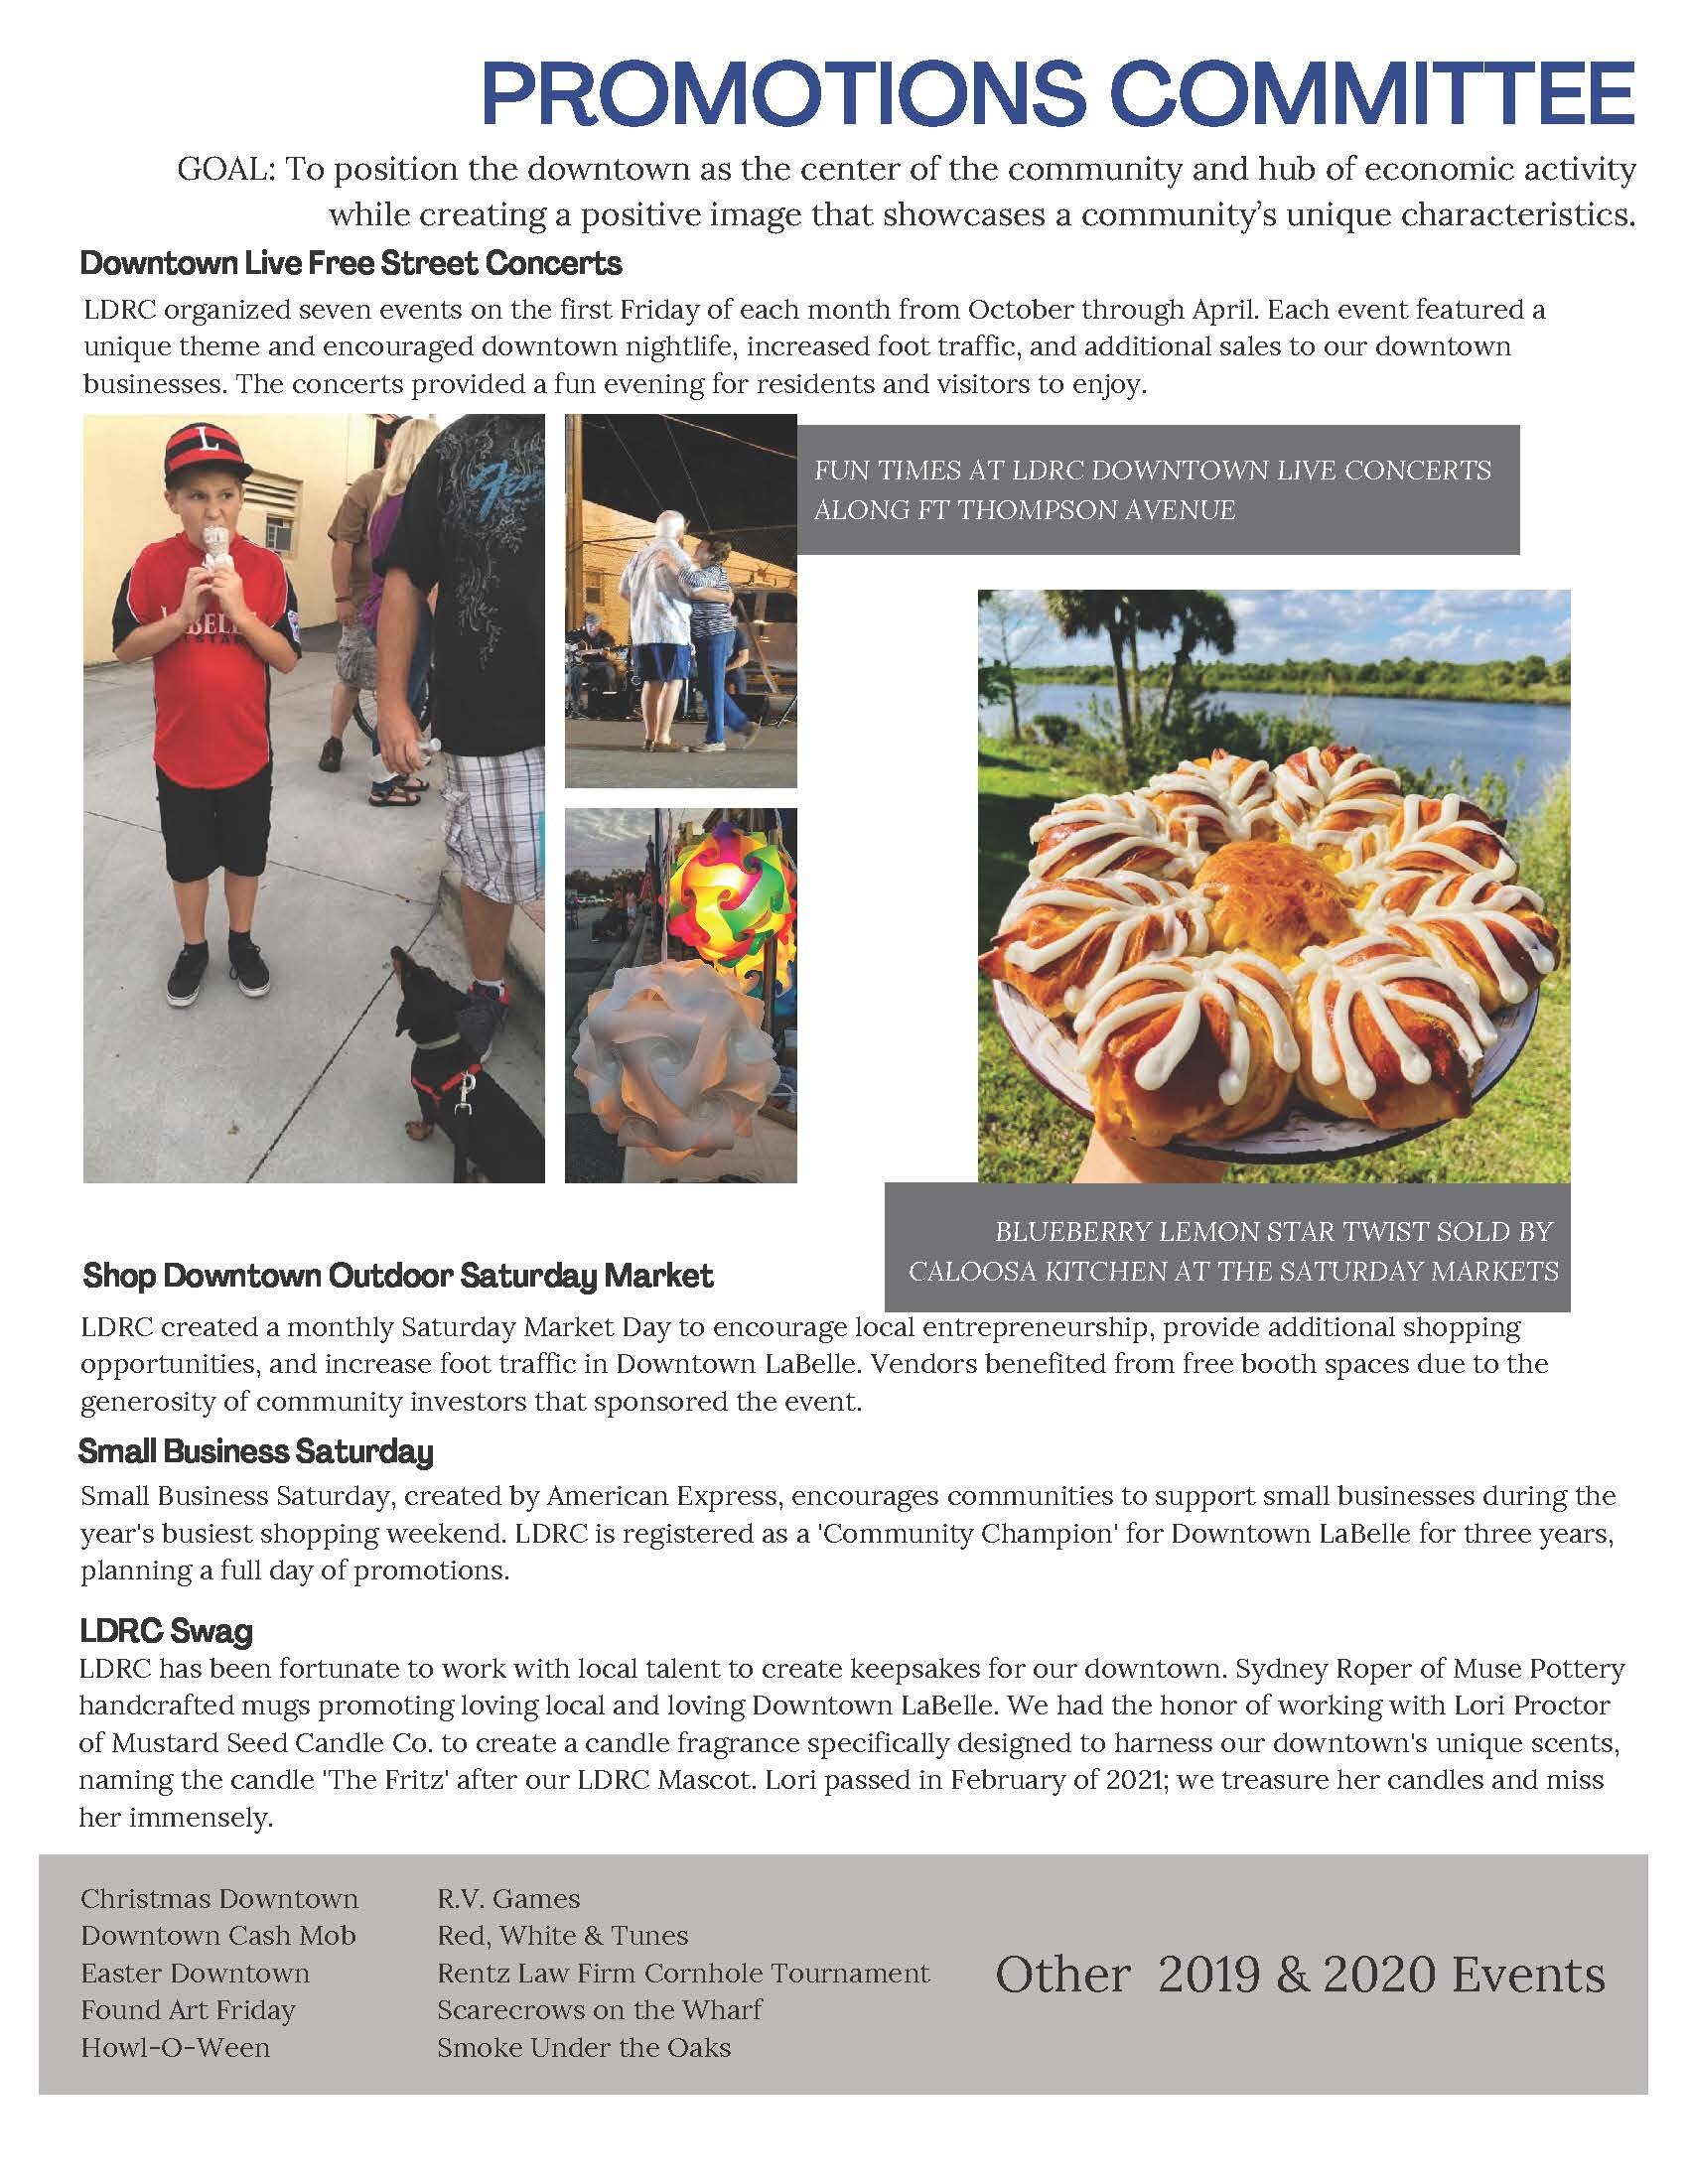 LDRC 201920 Annual Report (1)_Page_6.jpg